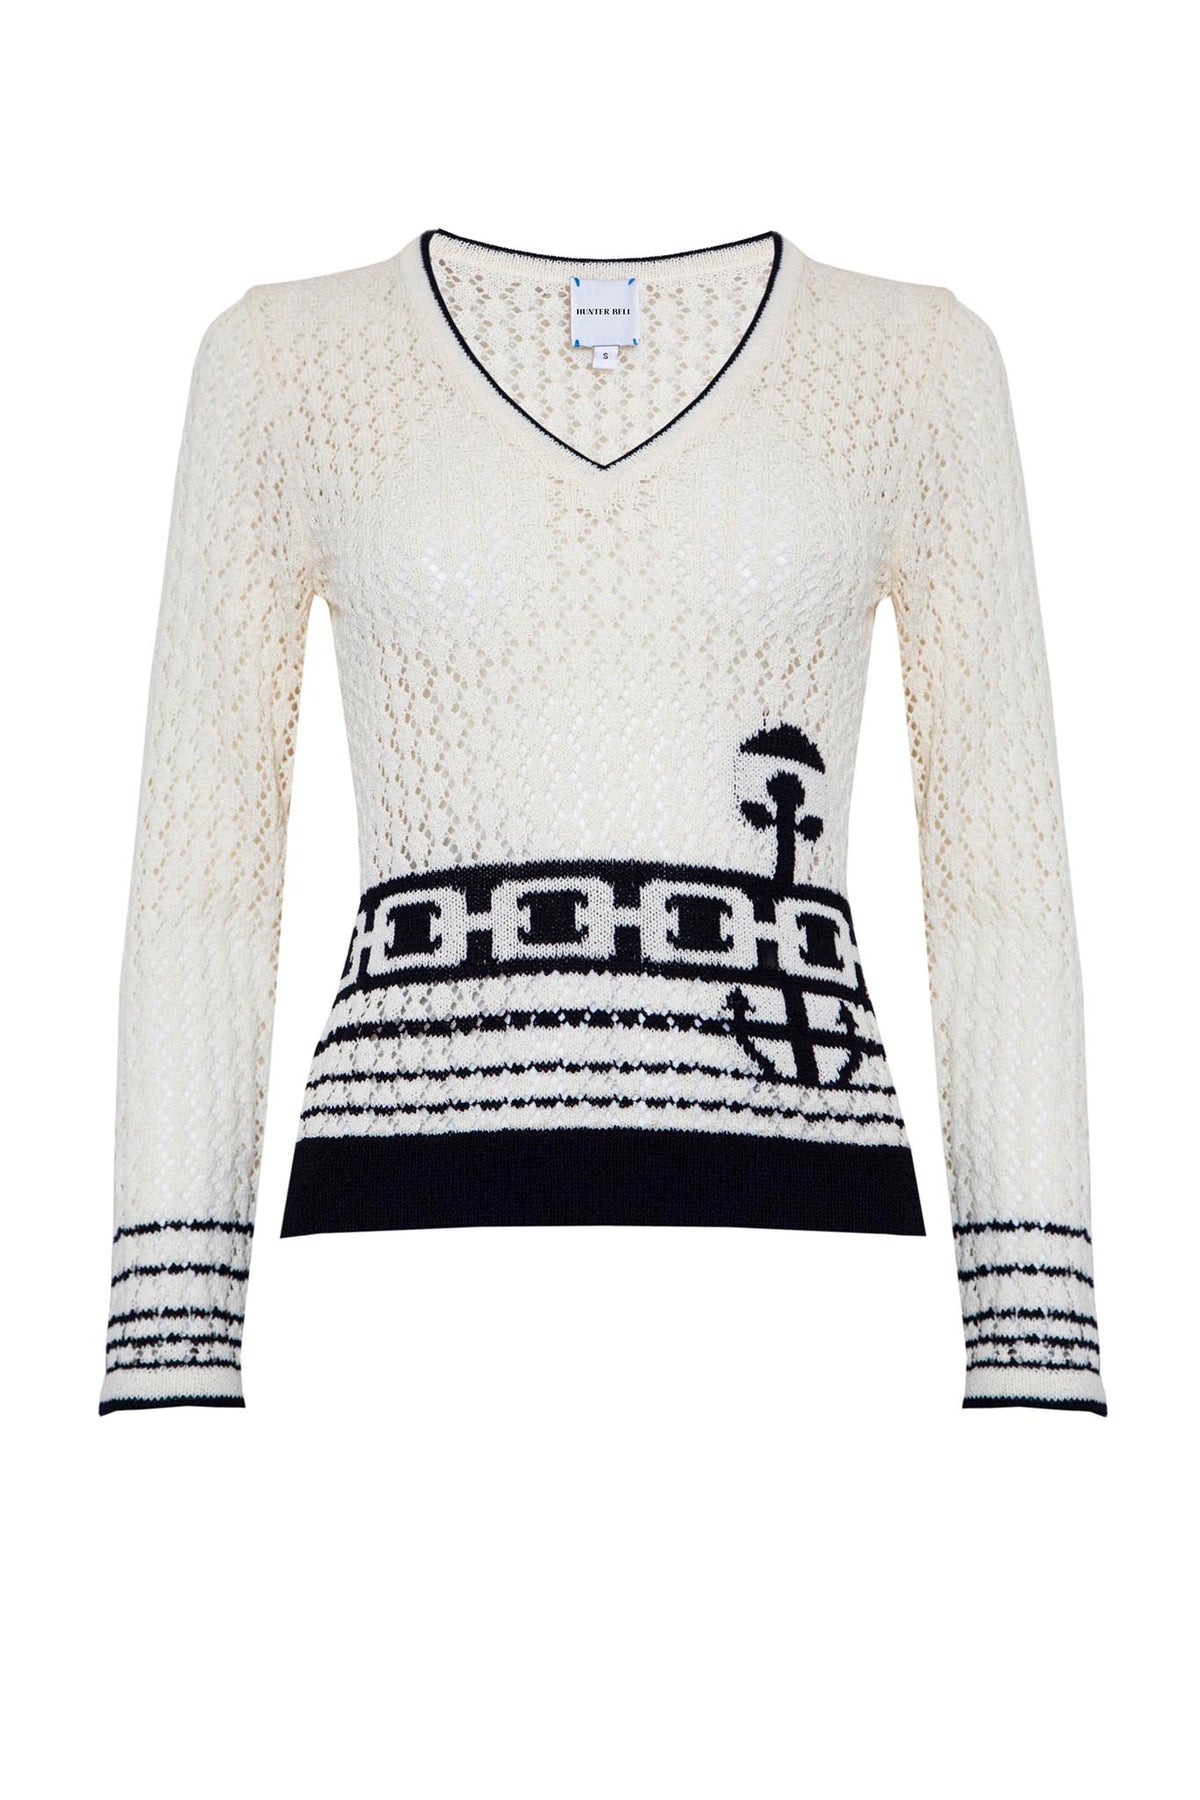 The Skylar sweater has a flattering v-neckline, a slim fit with anchor and stripe trim detailing.